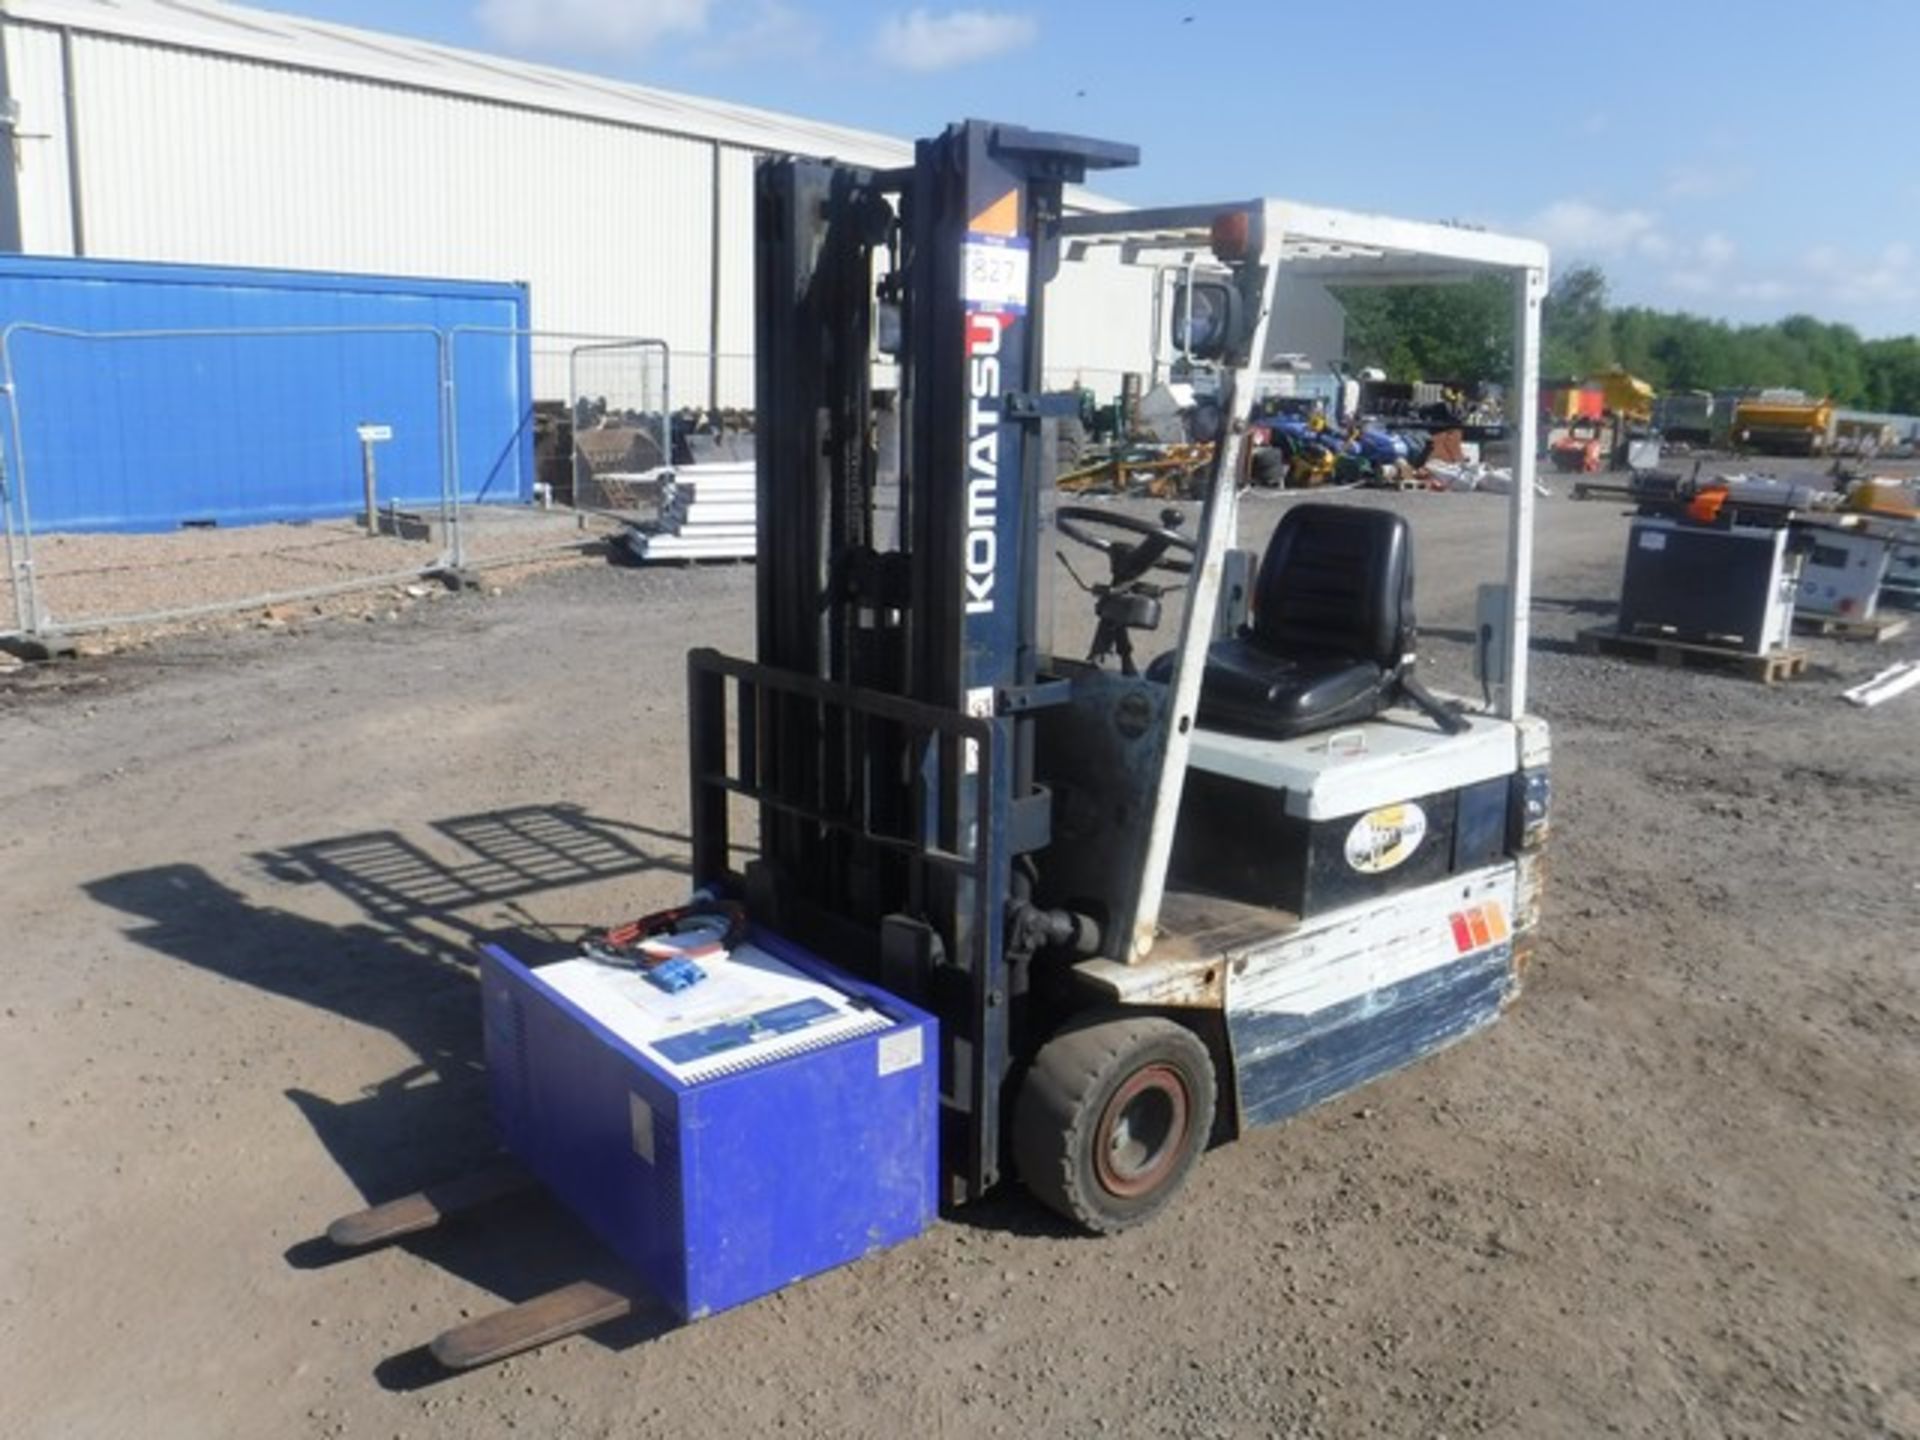 KOMATSU 18M ELECTRIC FORKLIFT 5082HRS (NOT VERIFIED) C/W CHARGER ASSET NO - 727-3301 - Image 7 of 7